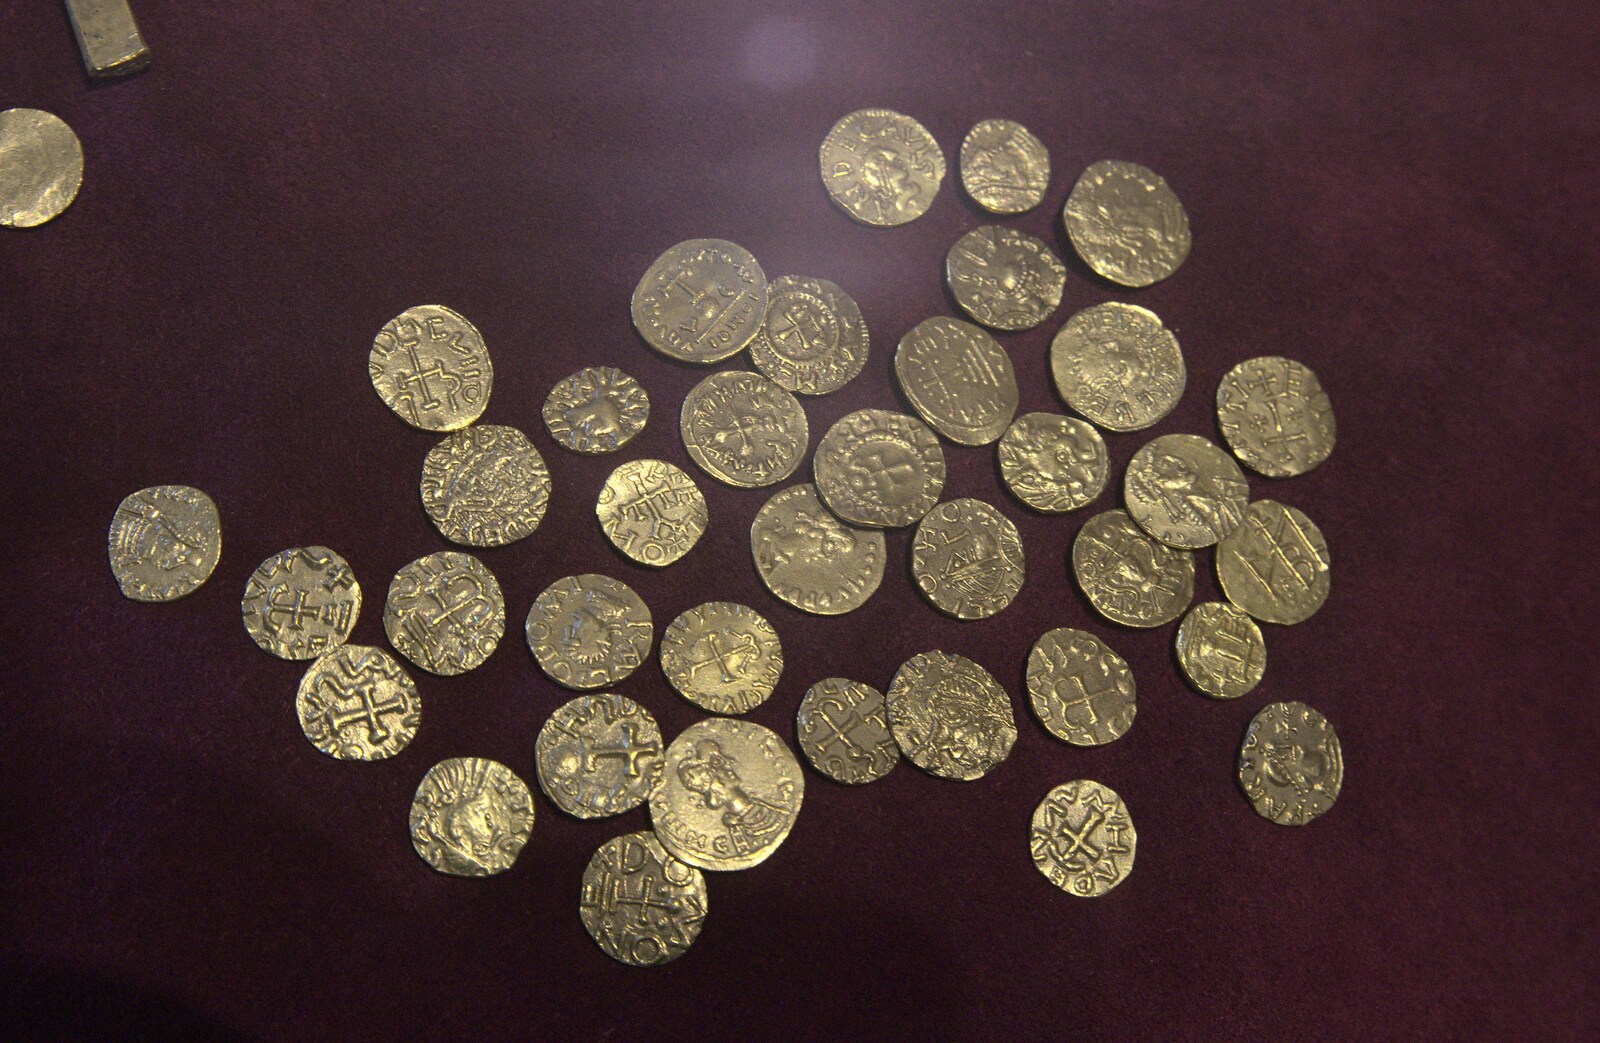 Reproductions of Saxon gold coins from the dig from A Trip to Sutton Hoo, Woodbridge, Suffolk - 29th January 2017